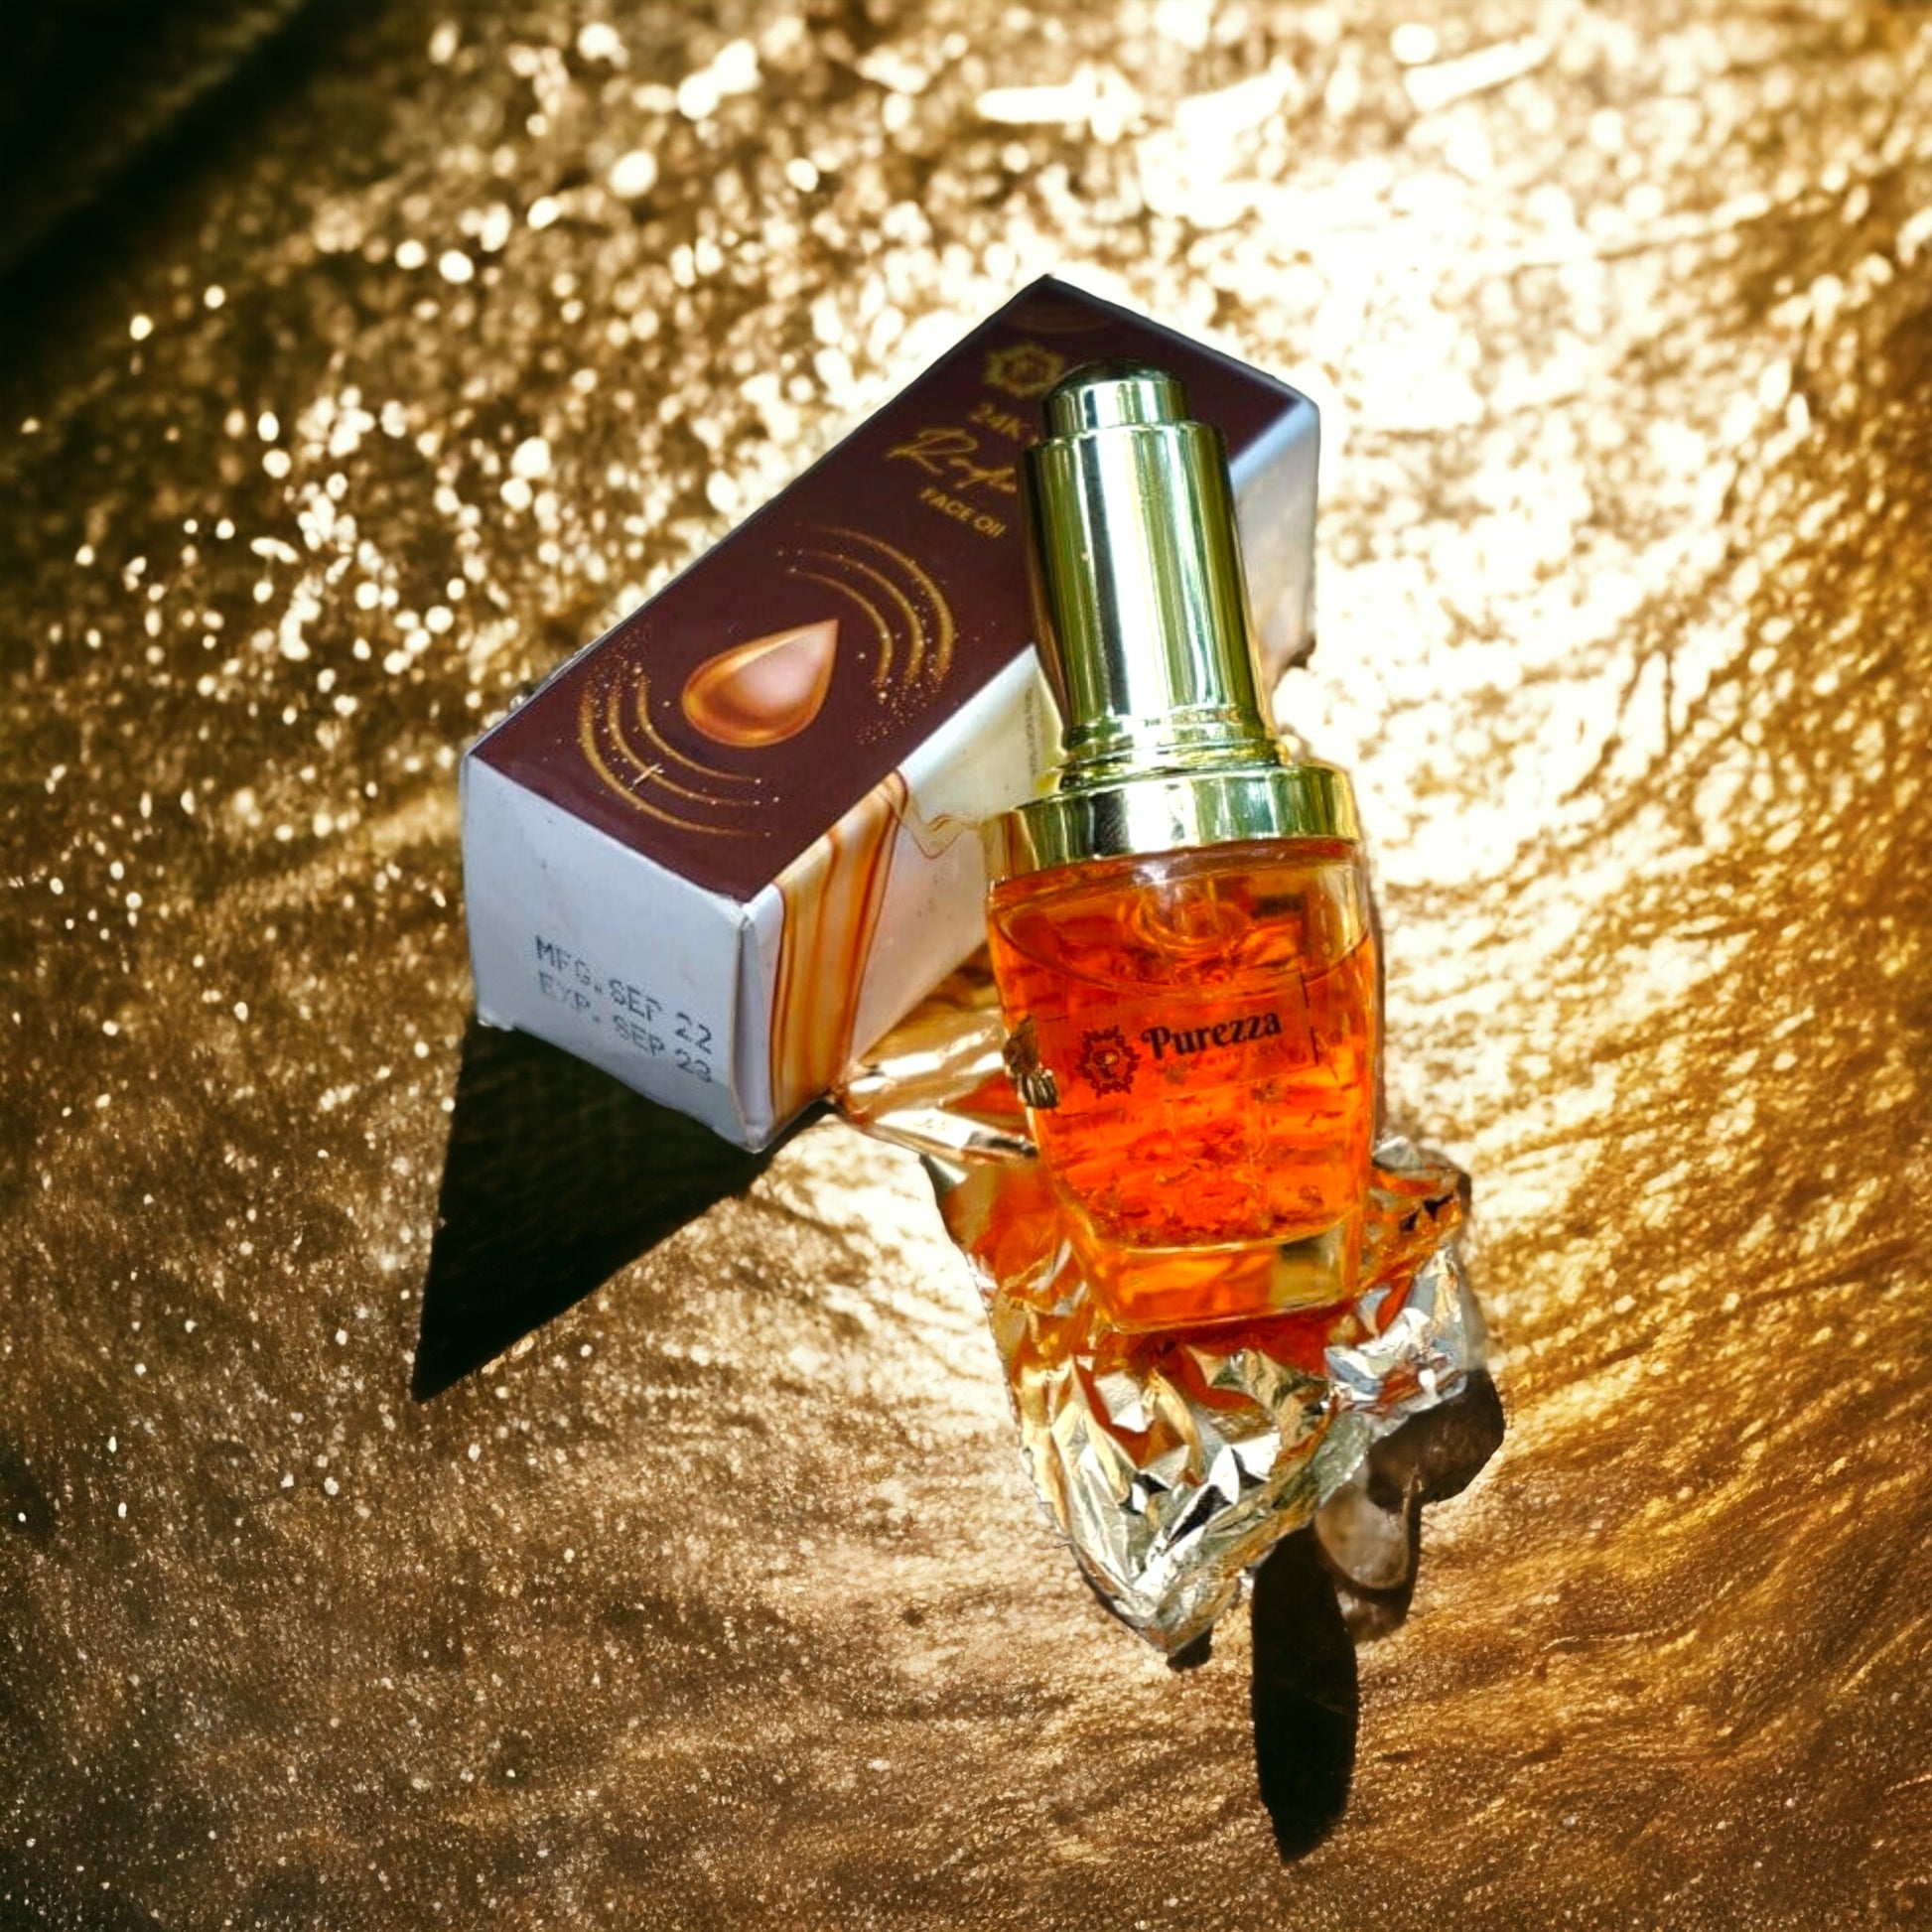 24K Gold Radiance Face Oil Purezza - Made With Love 